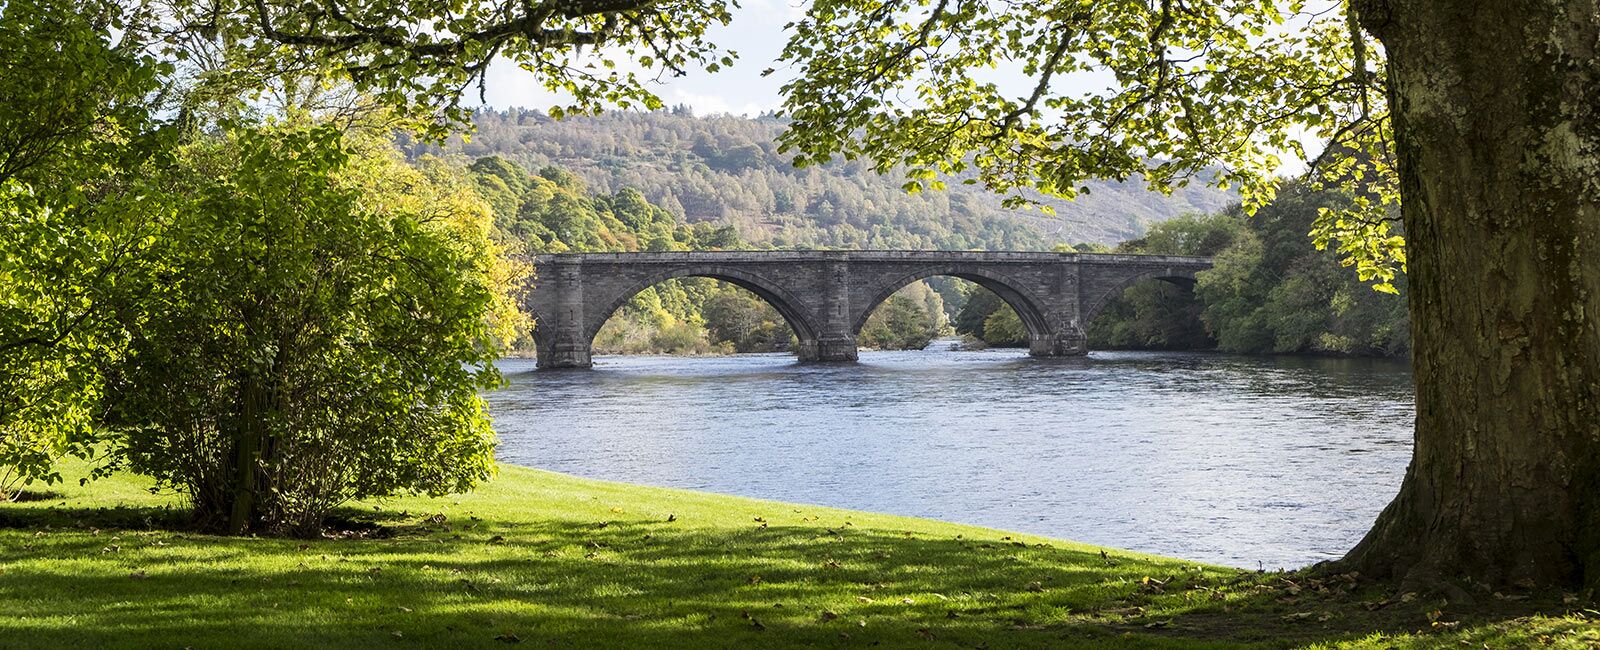 Enjoy the natural beauty of Scotland with Hilton Grand Vacations